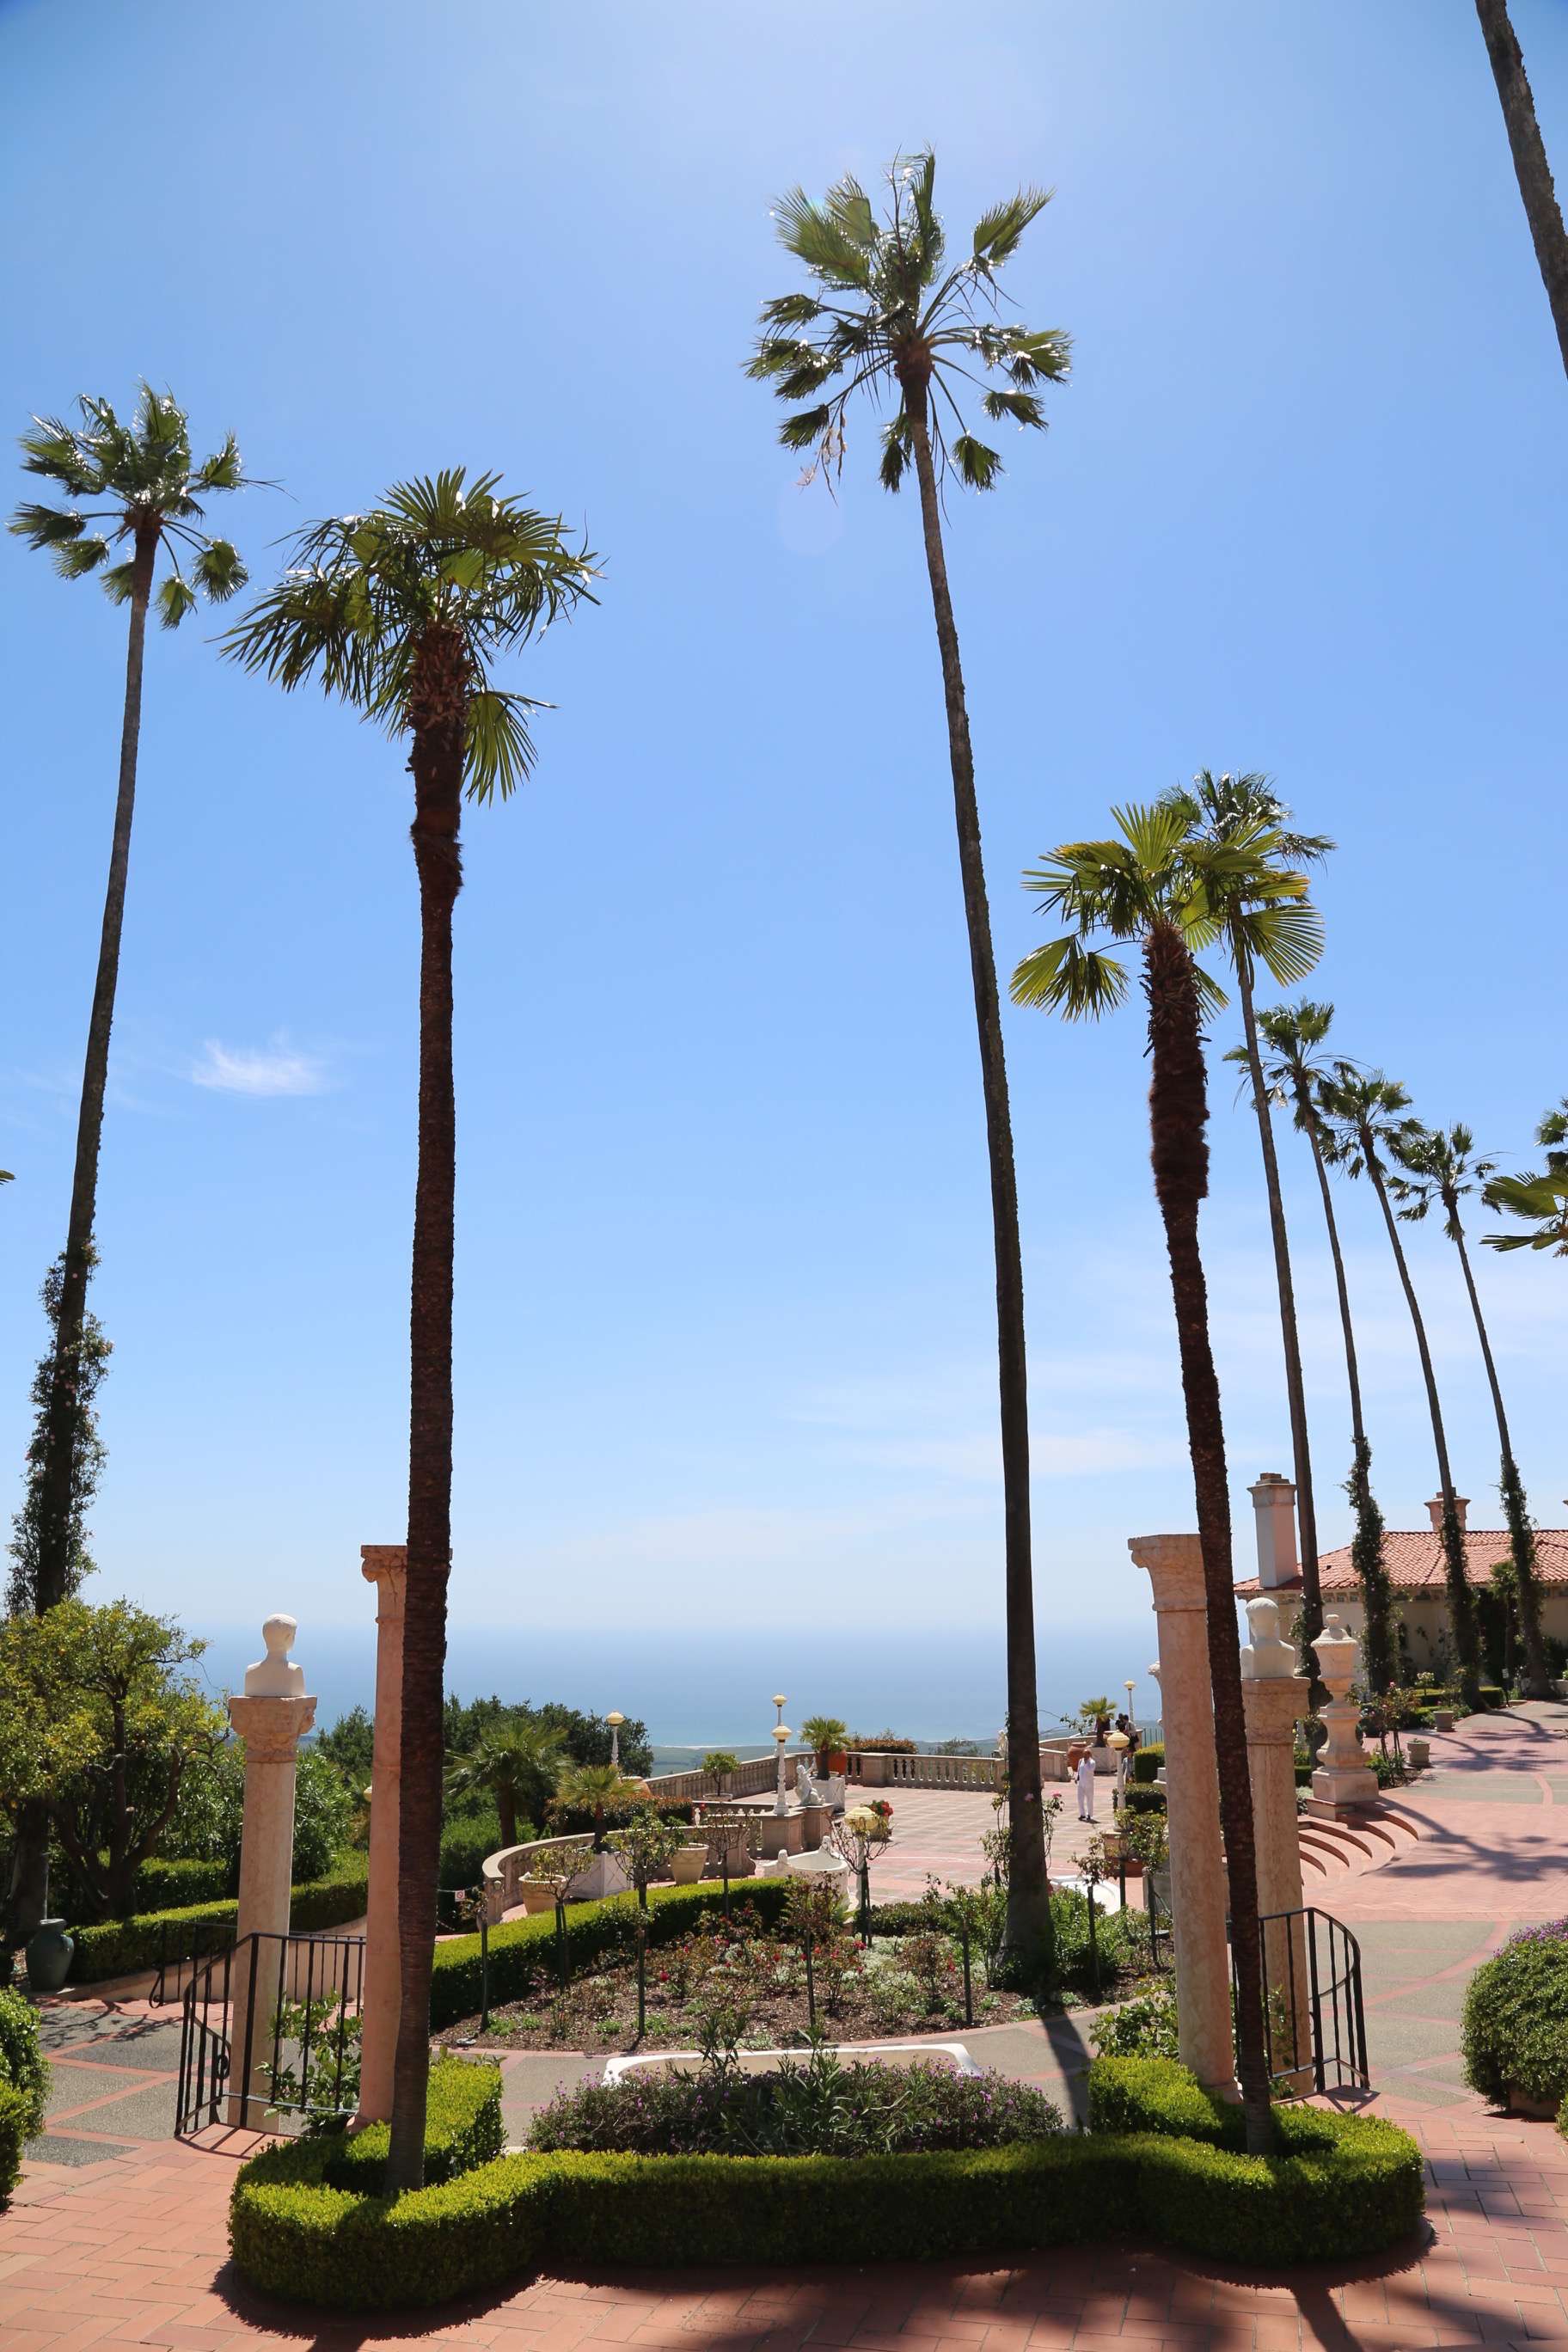 Julia Morgan took everything into account when building Hearst's dream. Here, she makes a wonderful view magnificent with artful framing and design.